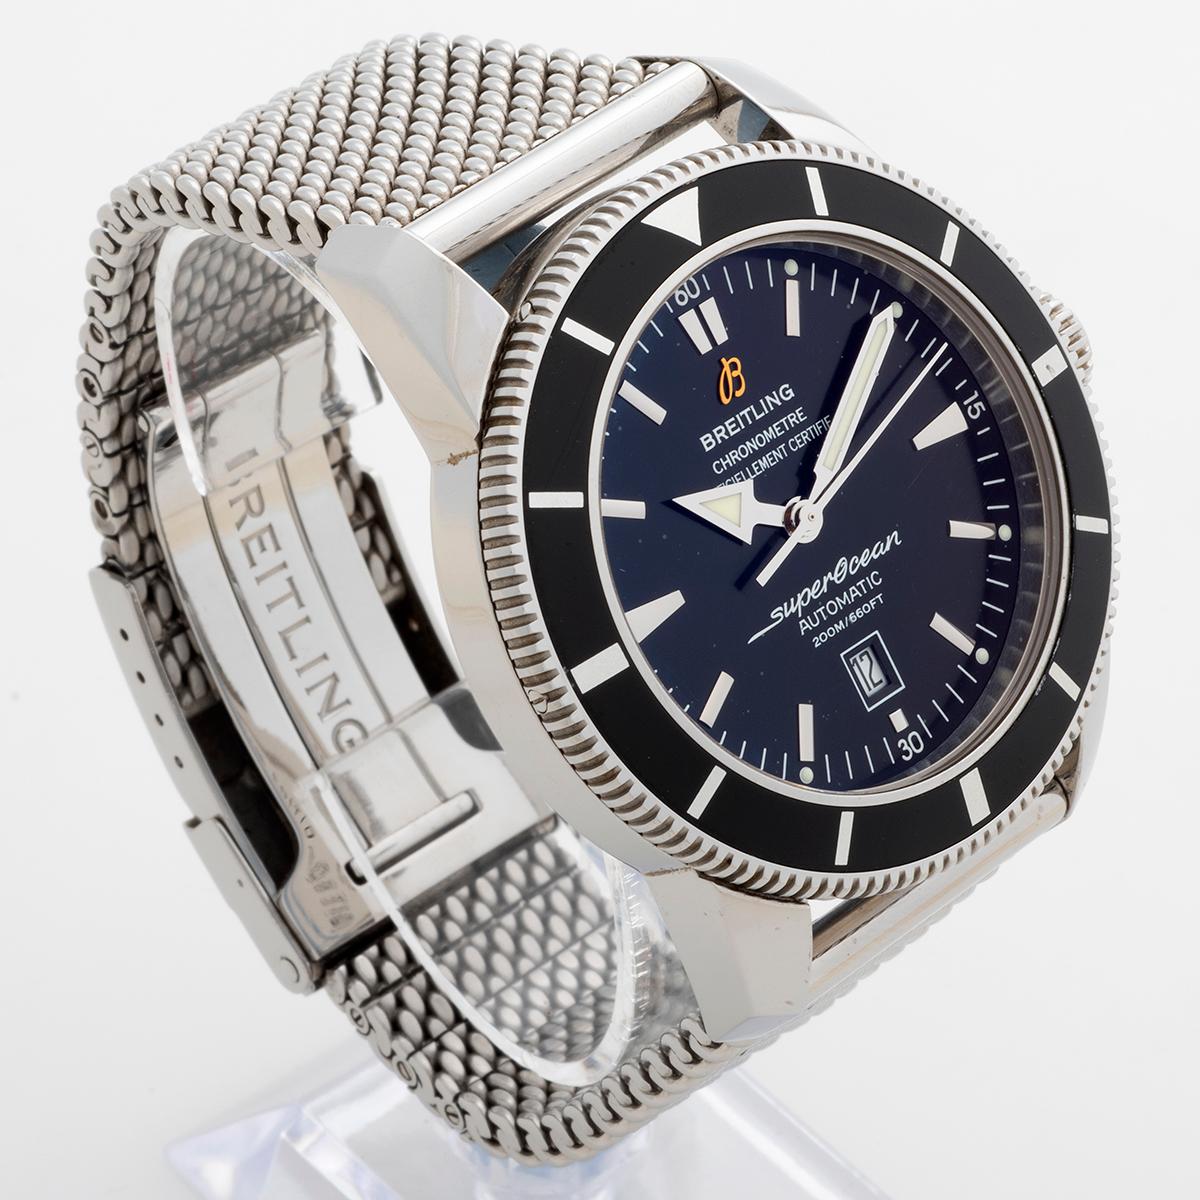 Our Breitling Superocean Heritage 46 reference A17320 features a 46mm stainless steel case with black dial and rotating bezel as well as the favoured mesh stainless steel bracelet. An iconic and robust sports watch, this example is presented in